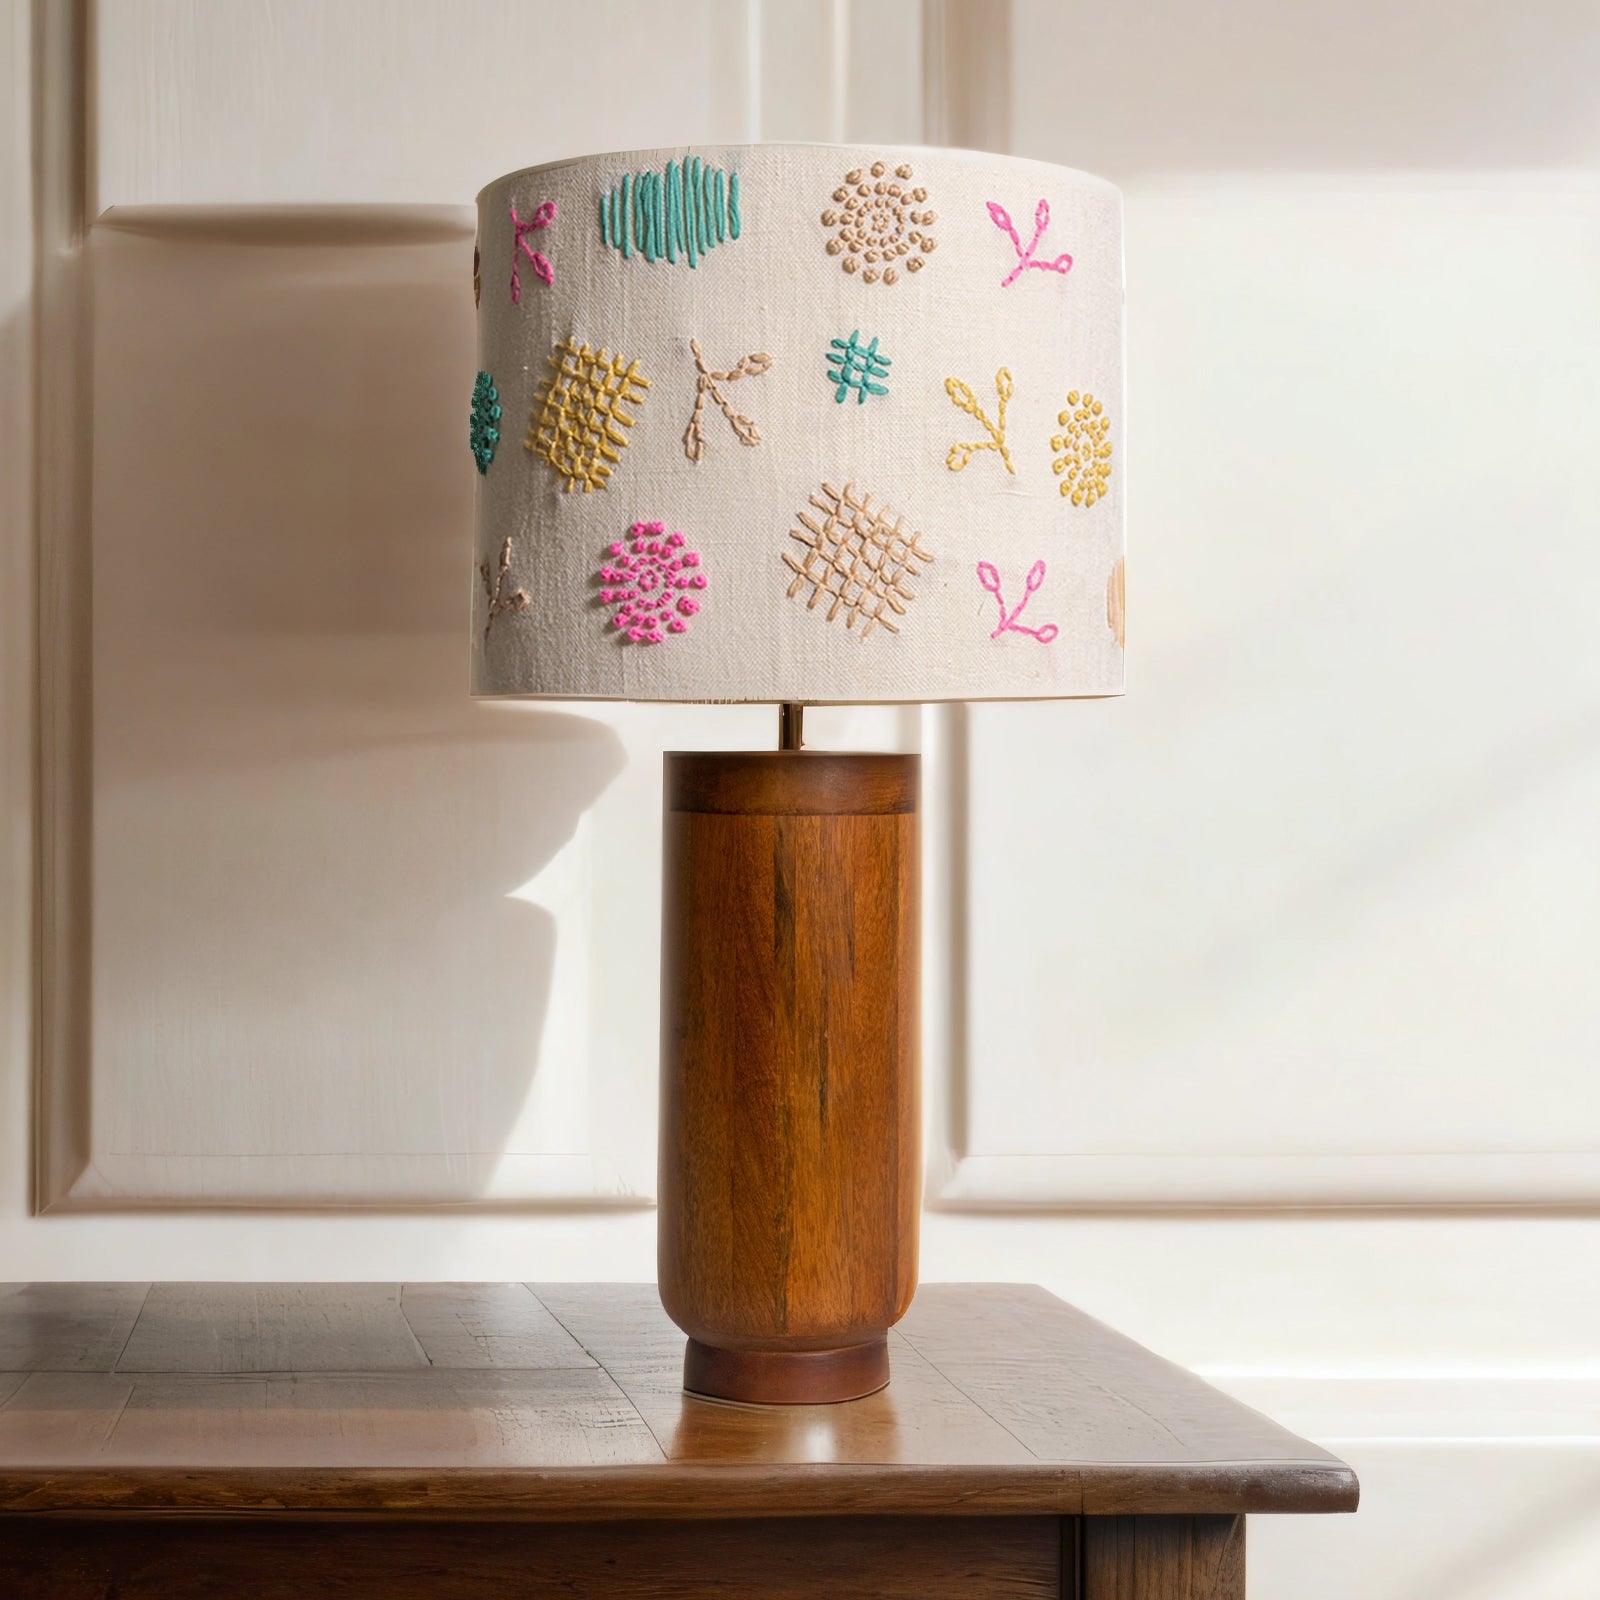 Gesu Table Lamp with cotton embroidery shade